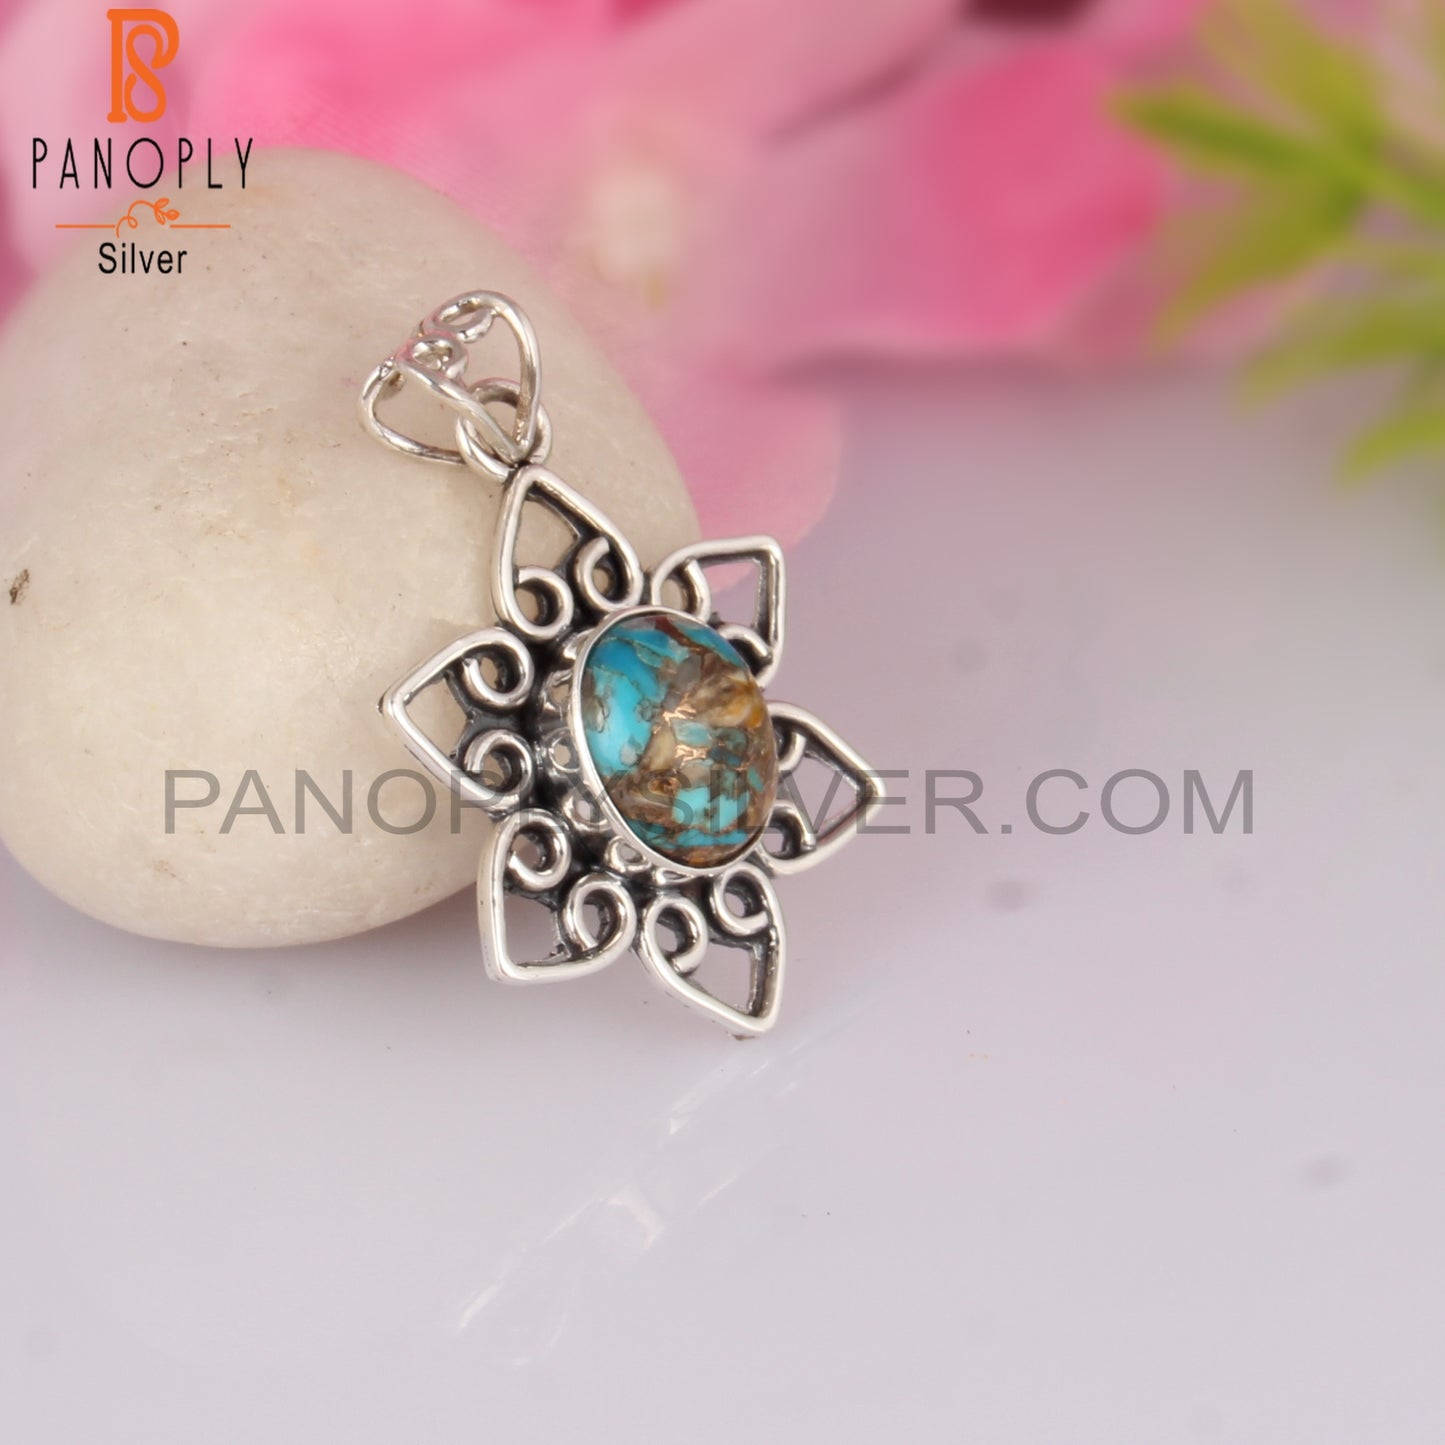 Mojave Copper Oyster Turquoise Flower Silver Pendant